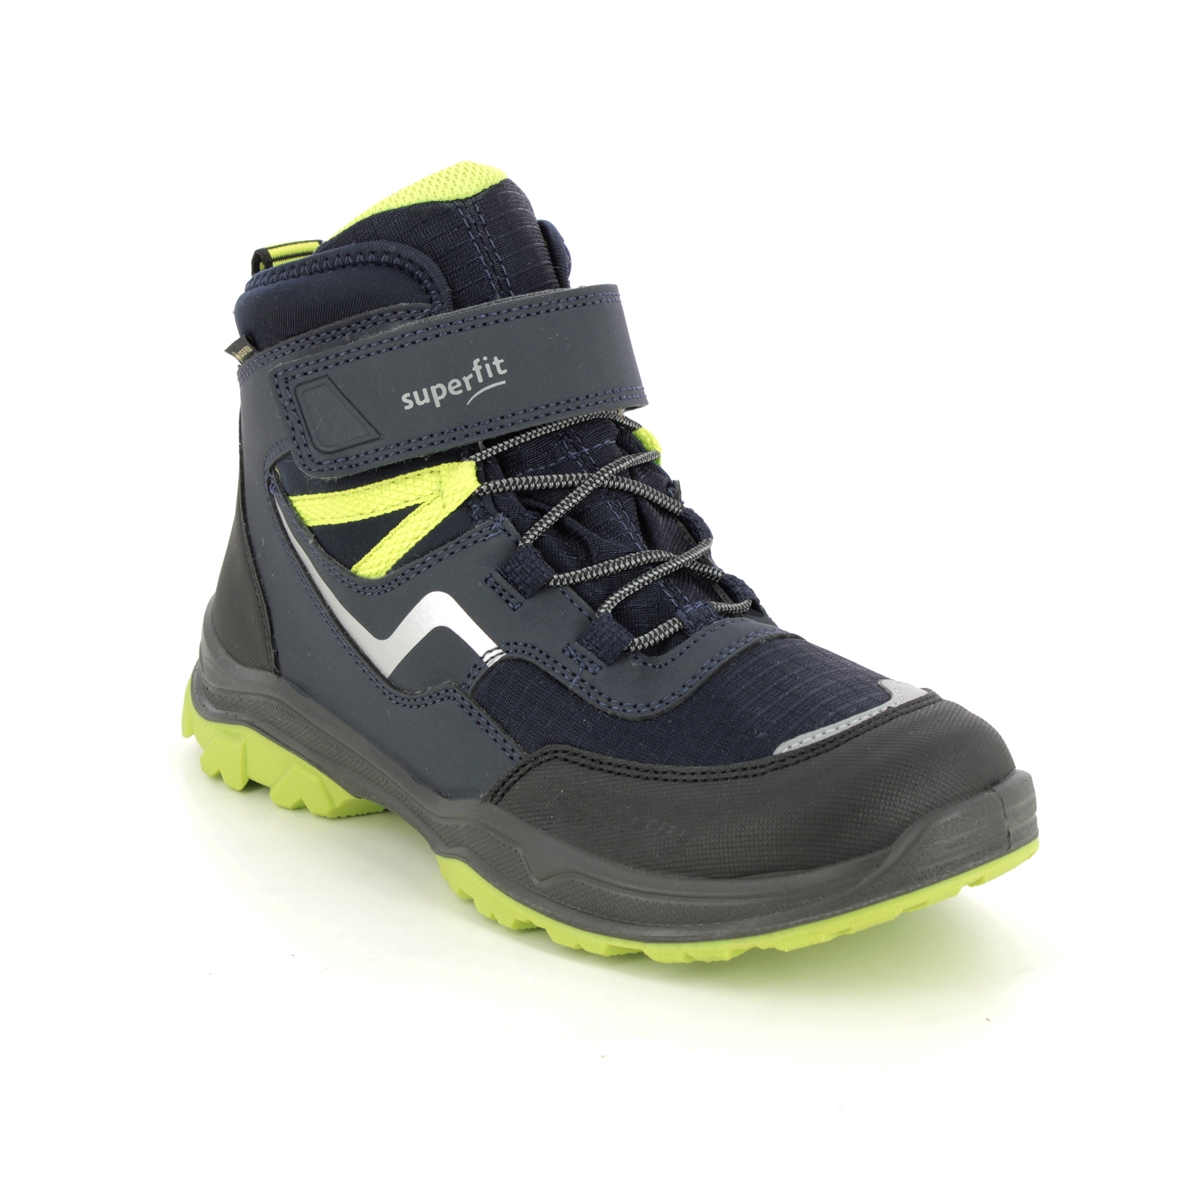 Superfit Jupiter Bungee Gtx Navy Lime Kids boys boots 1000074-8000 in a Plain Man-made in Size 40